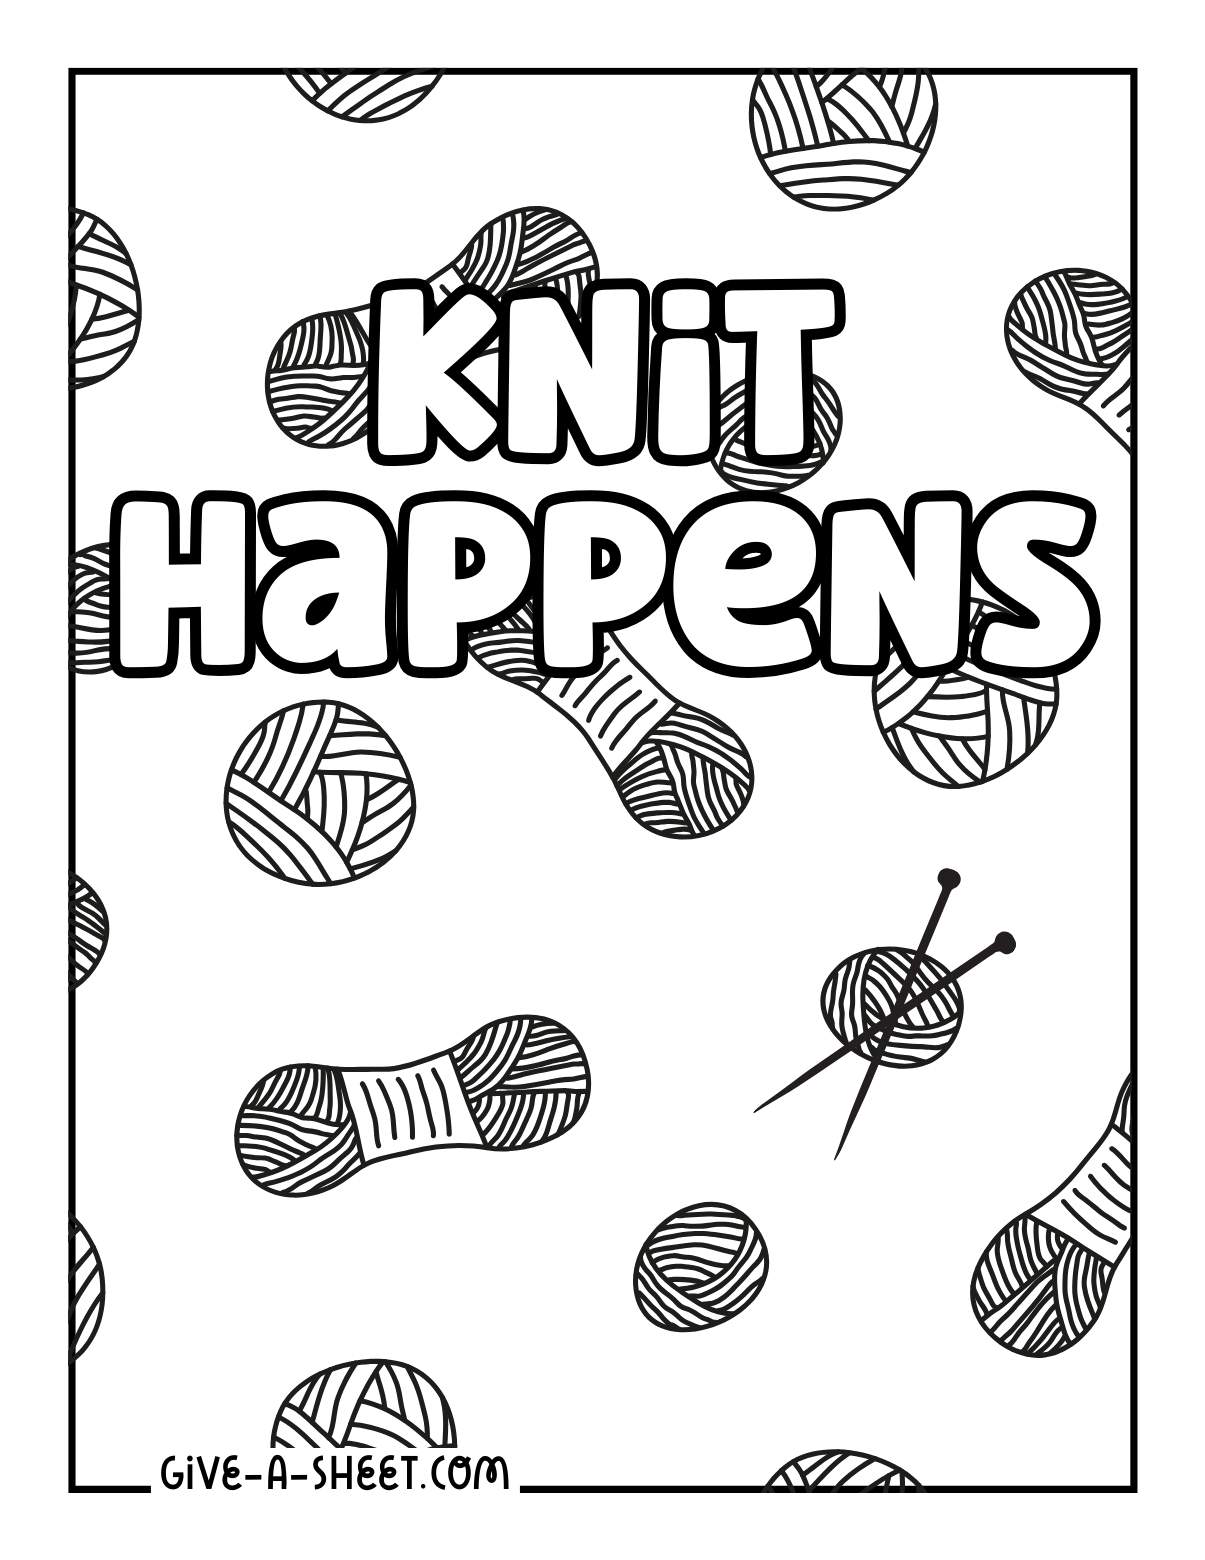 Knitting yarn skeins coloring page.